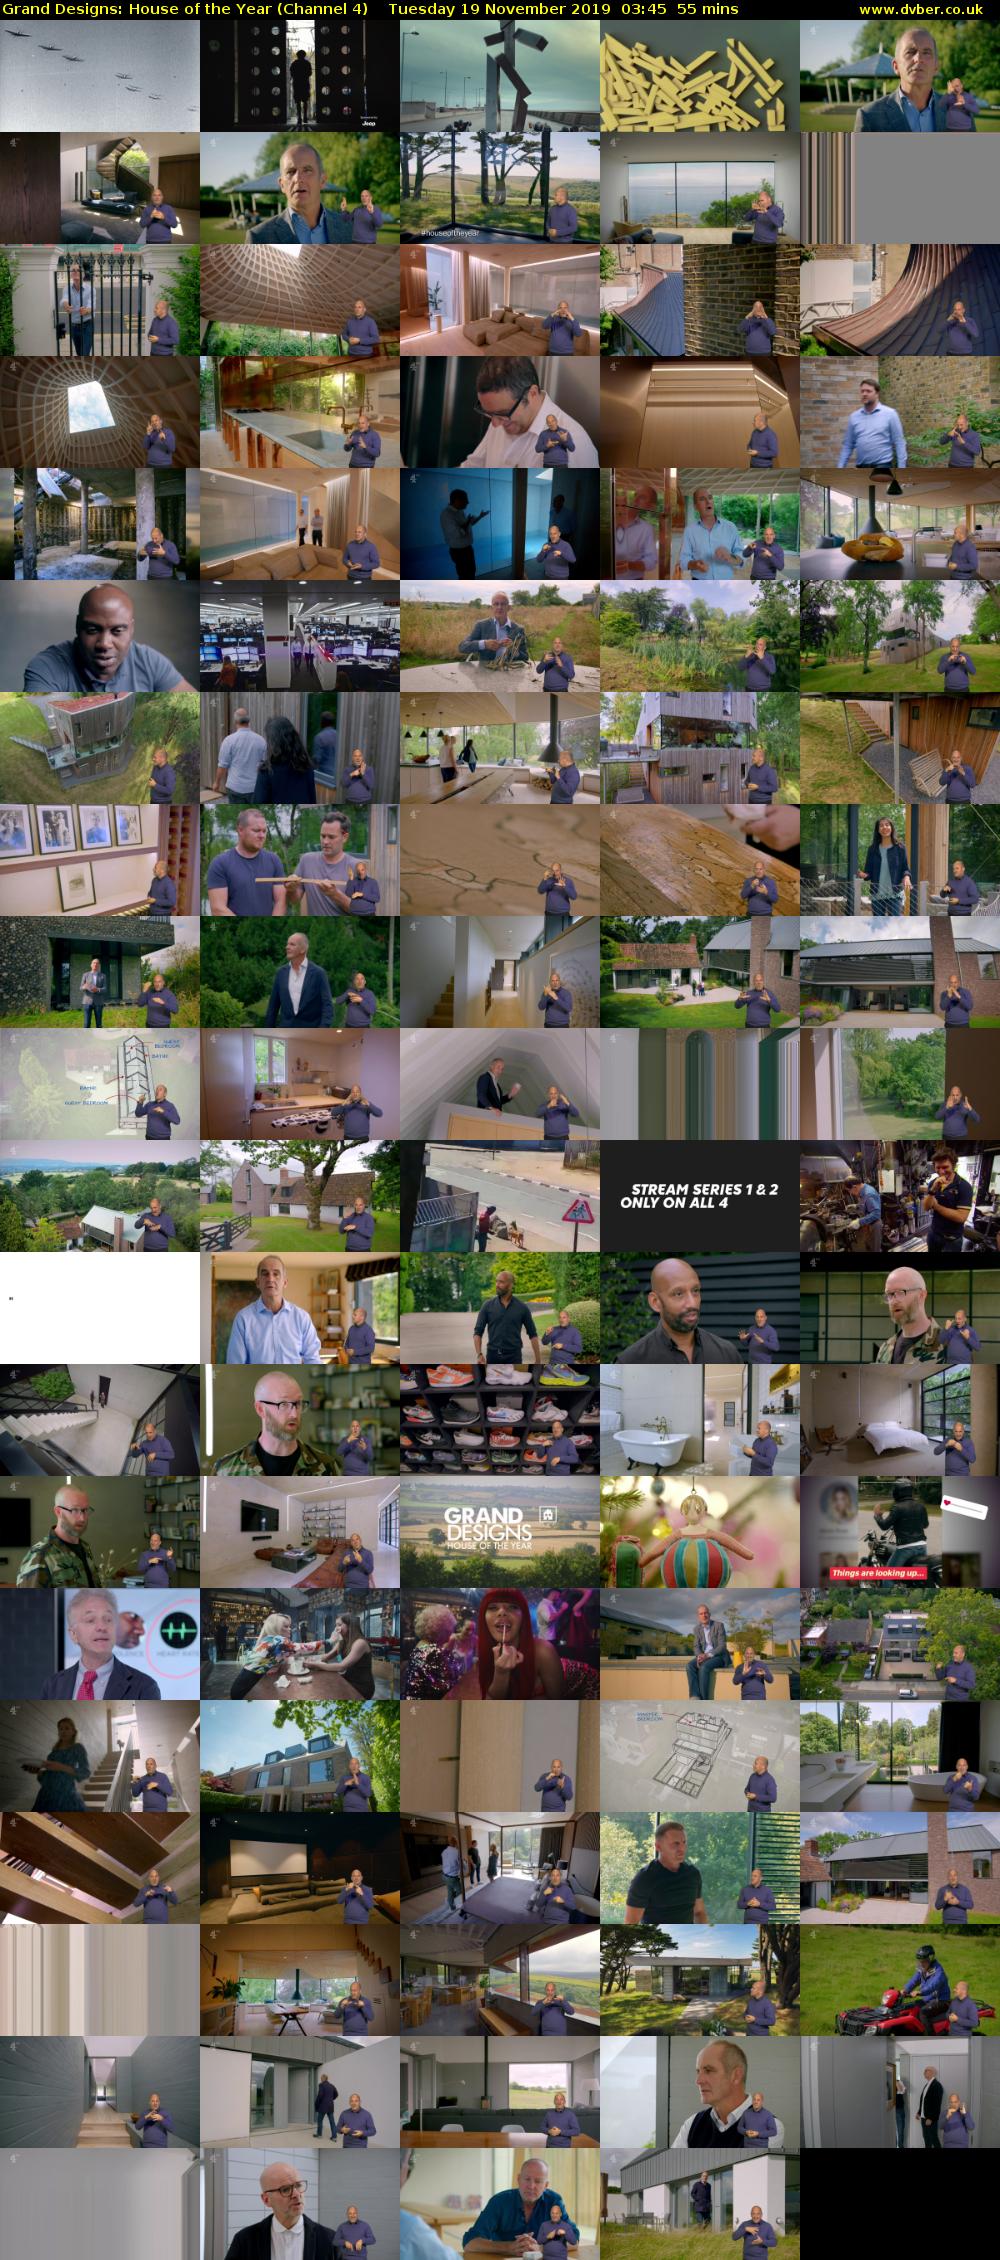 Grand Designs: House of the Year (Channel 4) Tuesday 19 November 2019 03:45 - 04:40